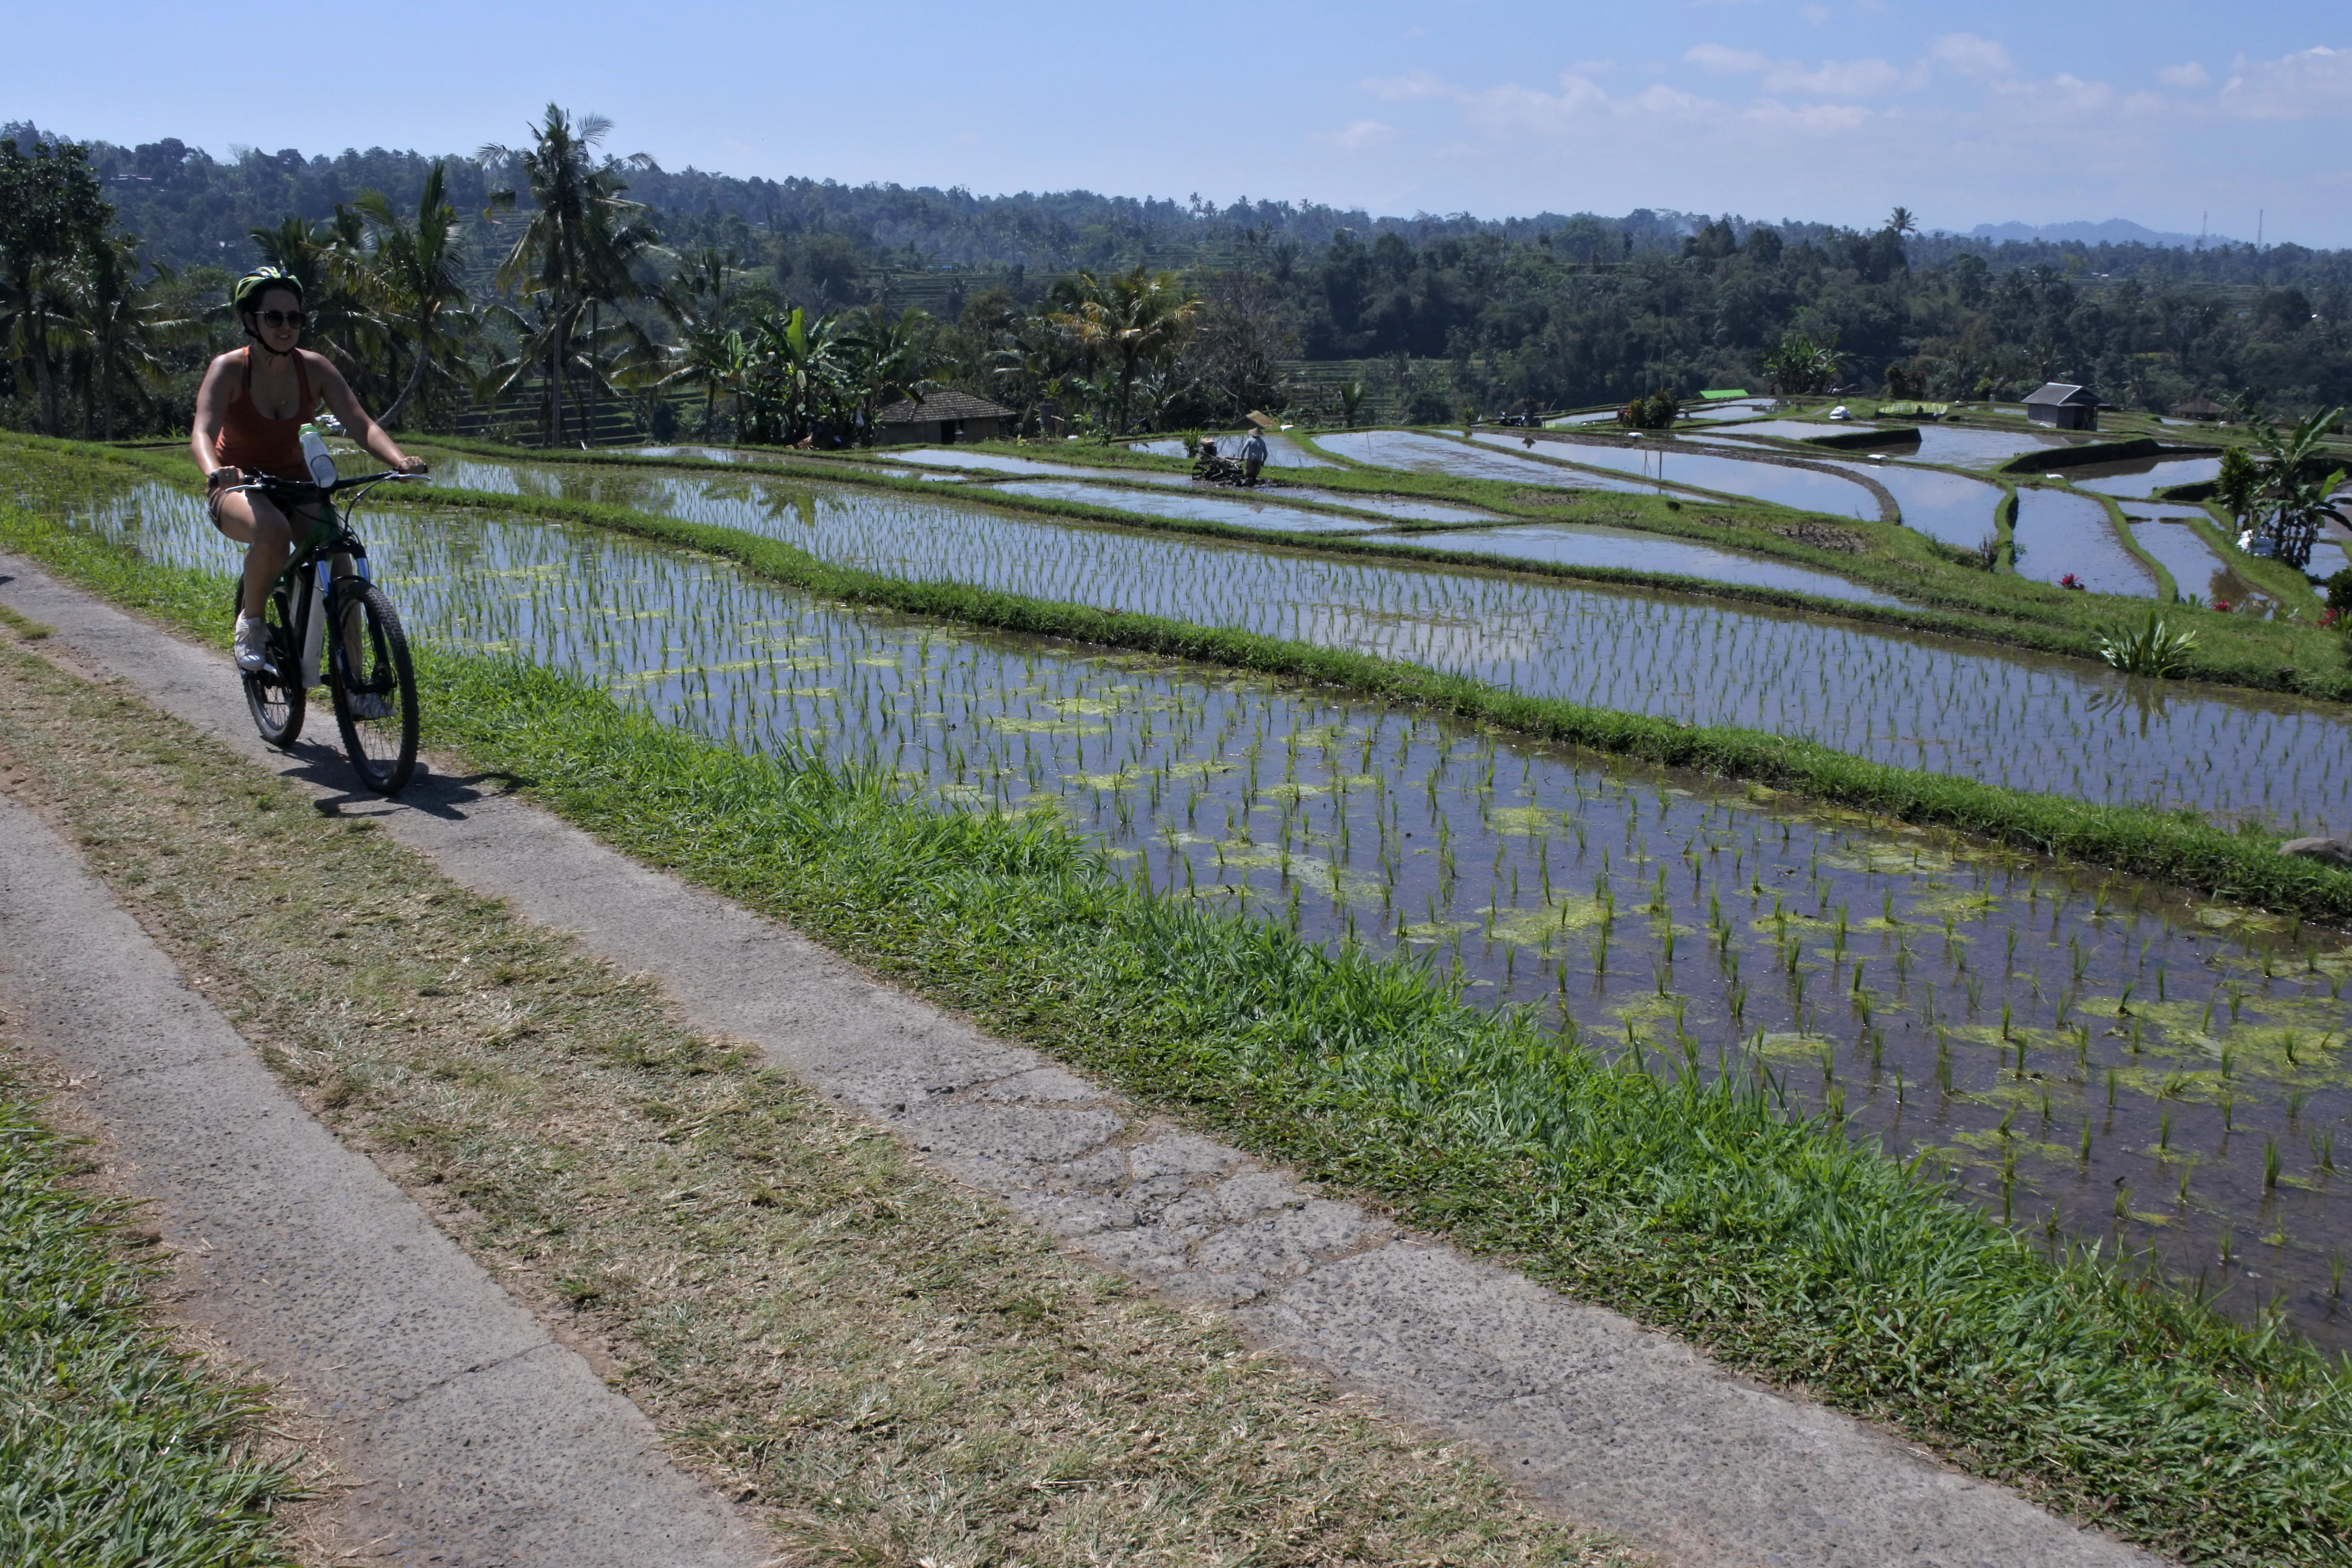 Take a cycling tour to explore the Tegalalang Rice Terrace